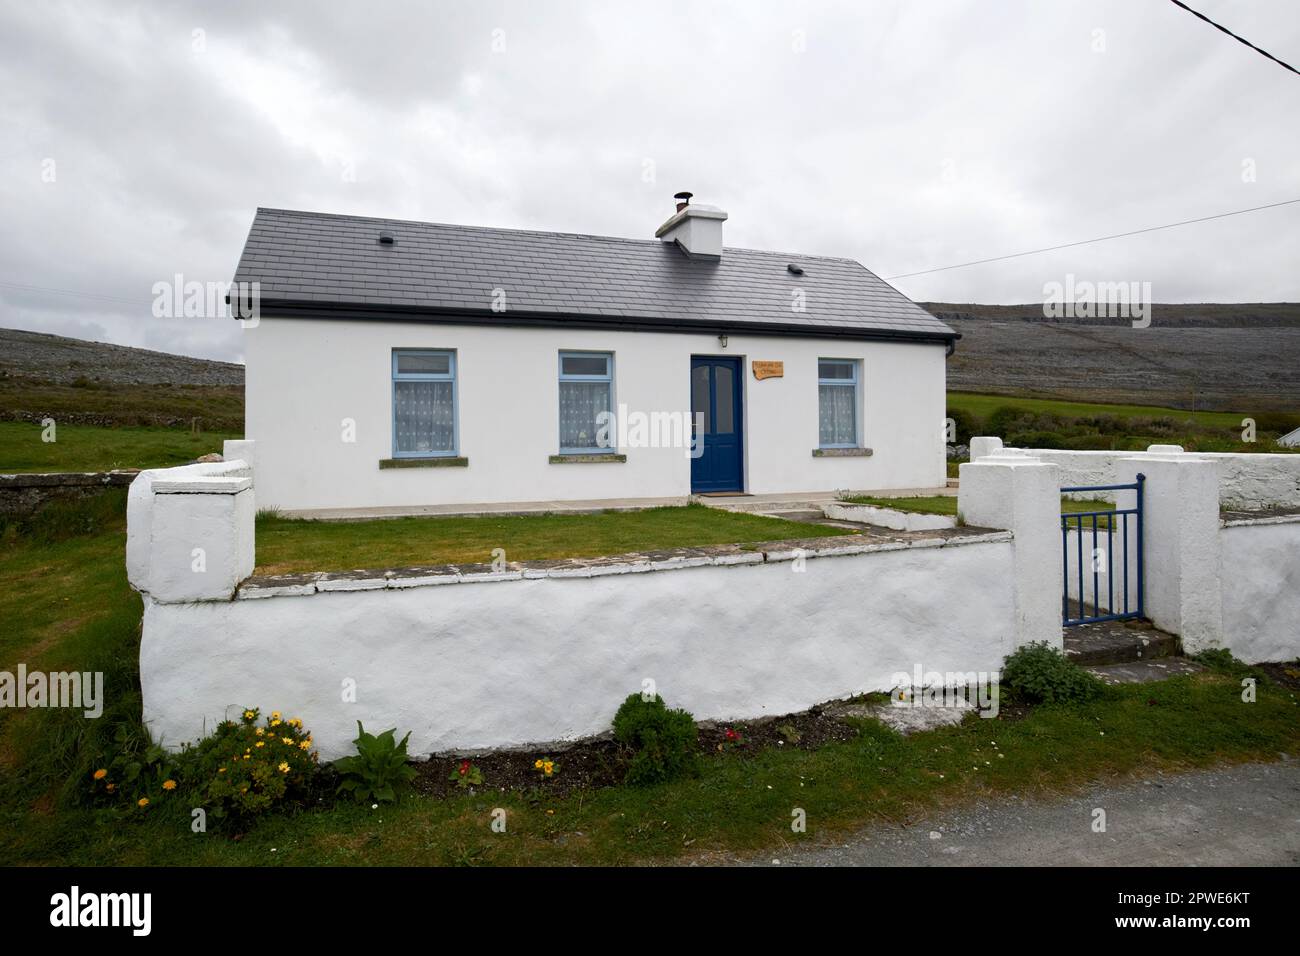 old irish stone cottage refurbished and turned into a holiday let in the burren county clare republic of ireland Stock Photo